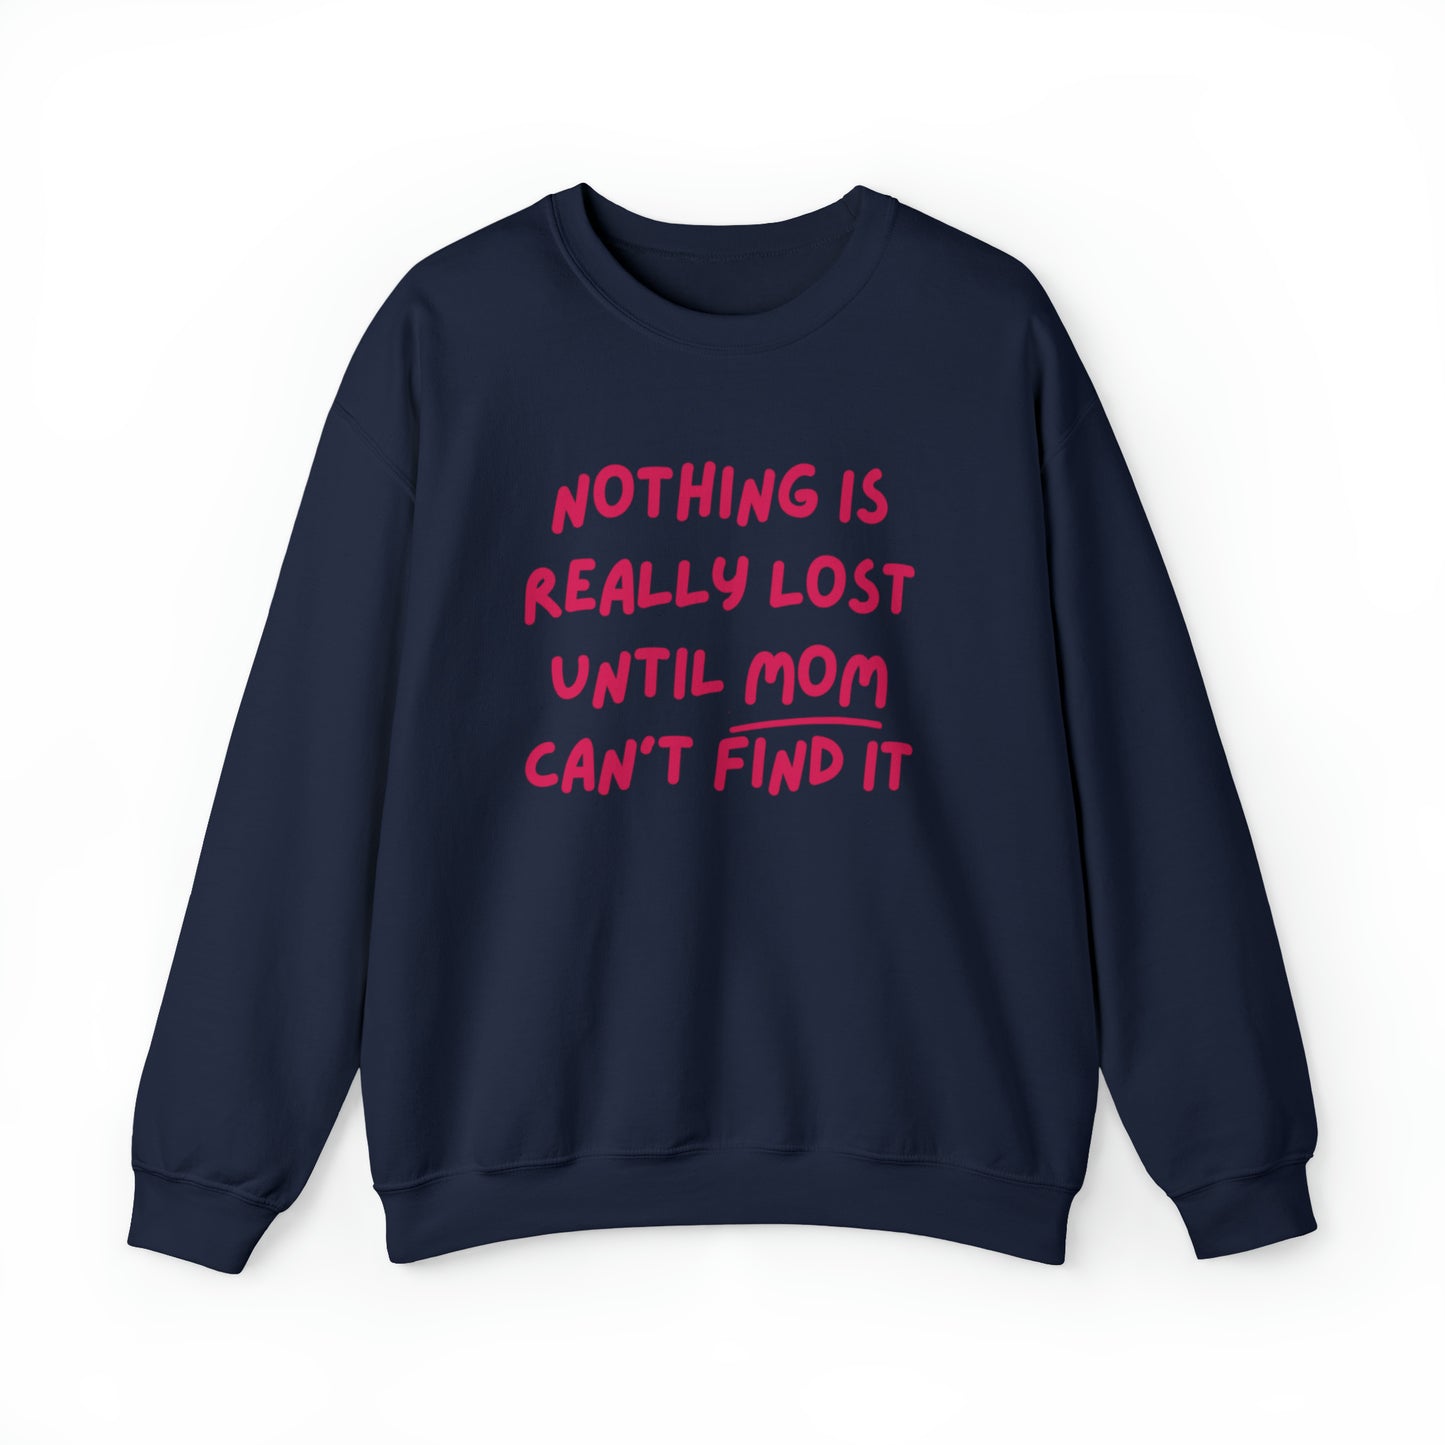 Nothing Is Really Lost Funny Shirt - Hilarious Gift for Moms Sweatshirt